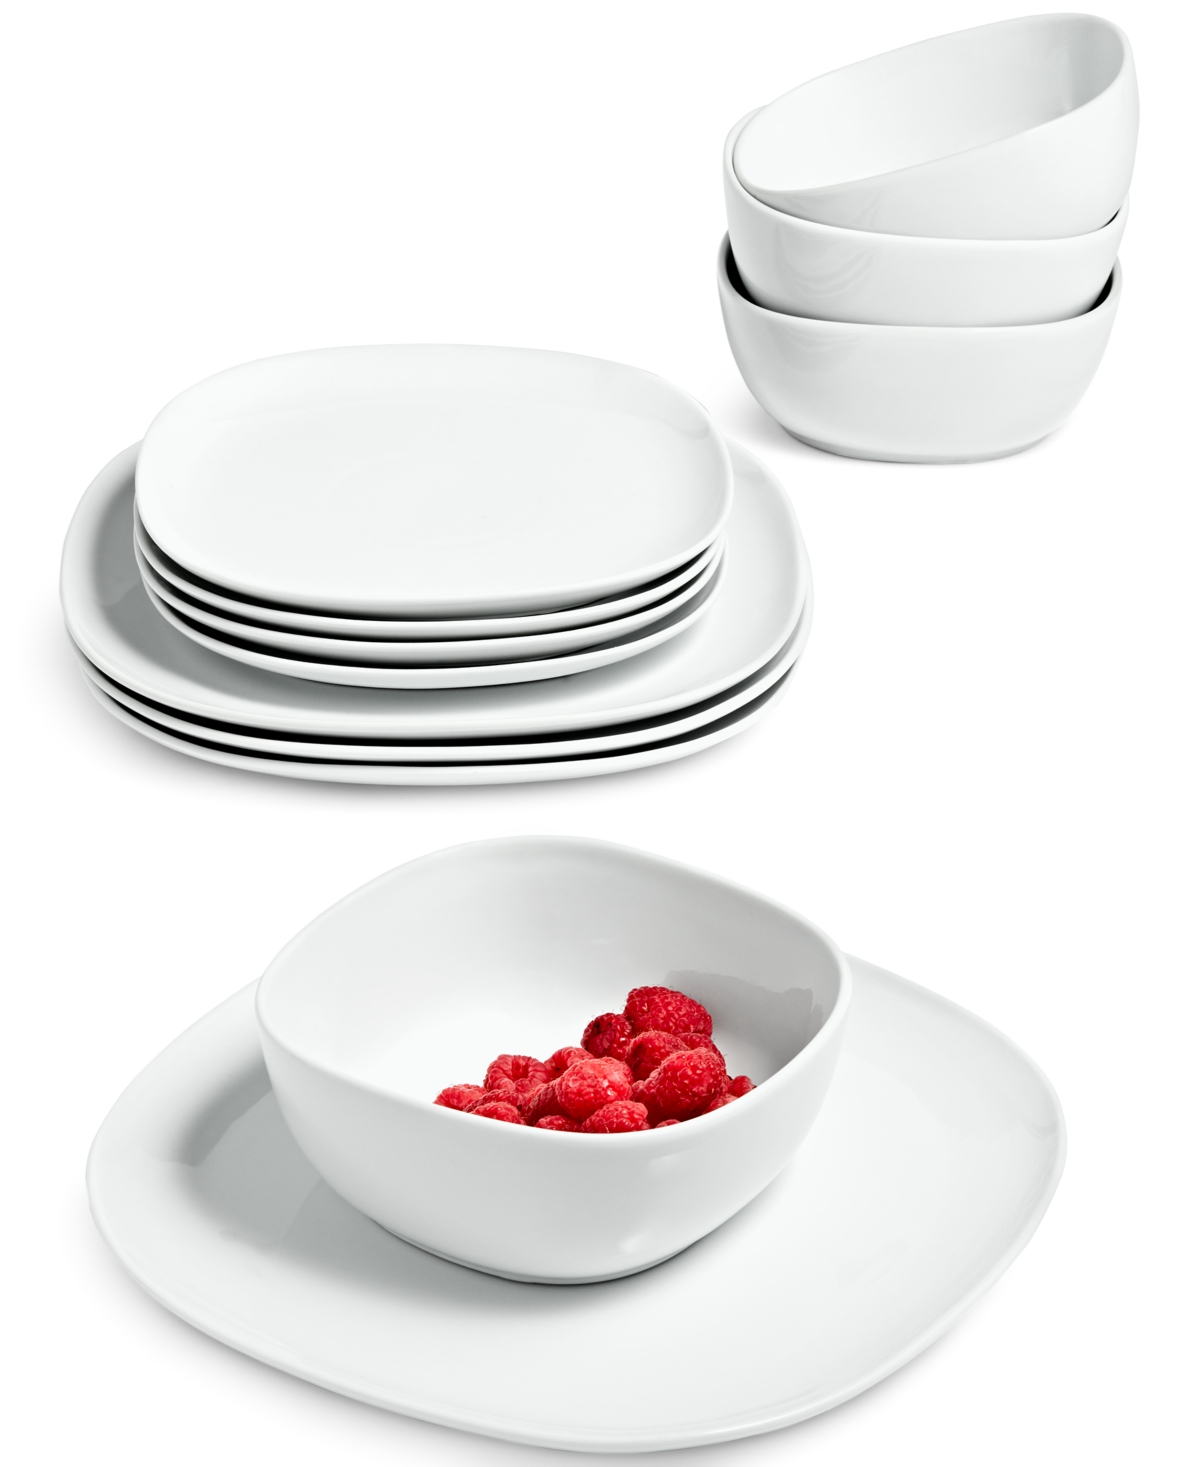 Whiteware Soft Square 12-Pc. Dinnerware Set, Service for 4, Created for Macy's - White